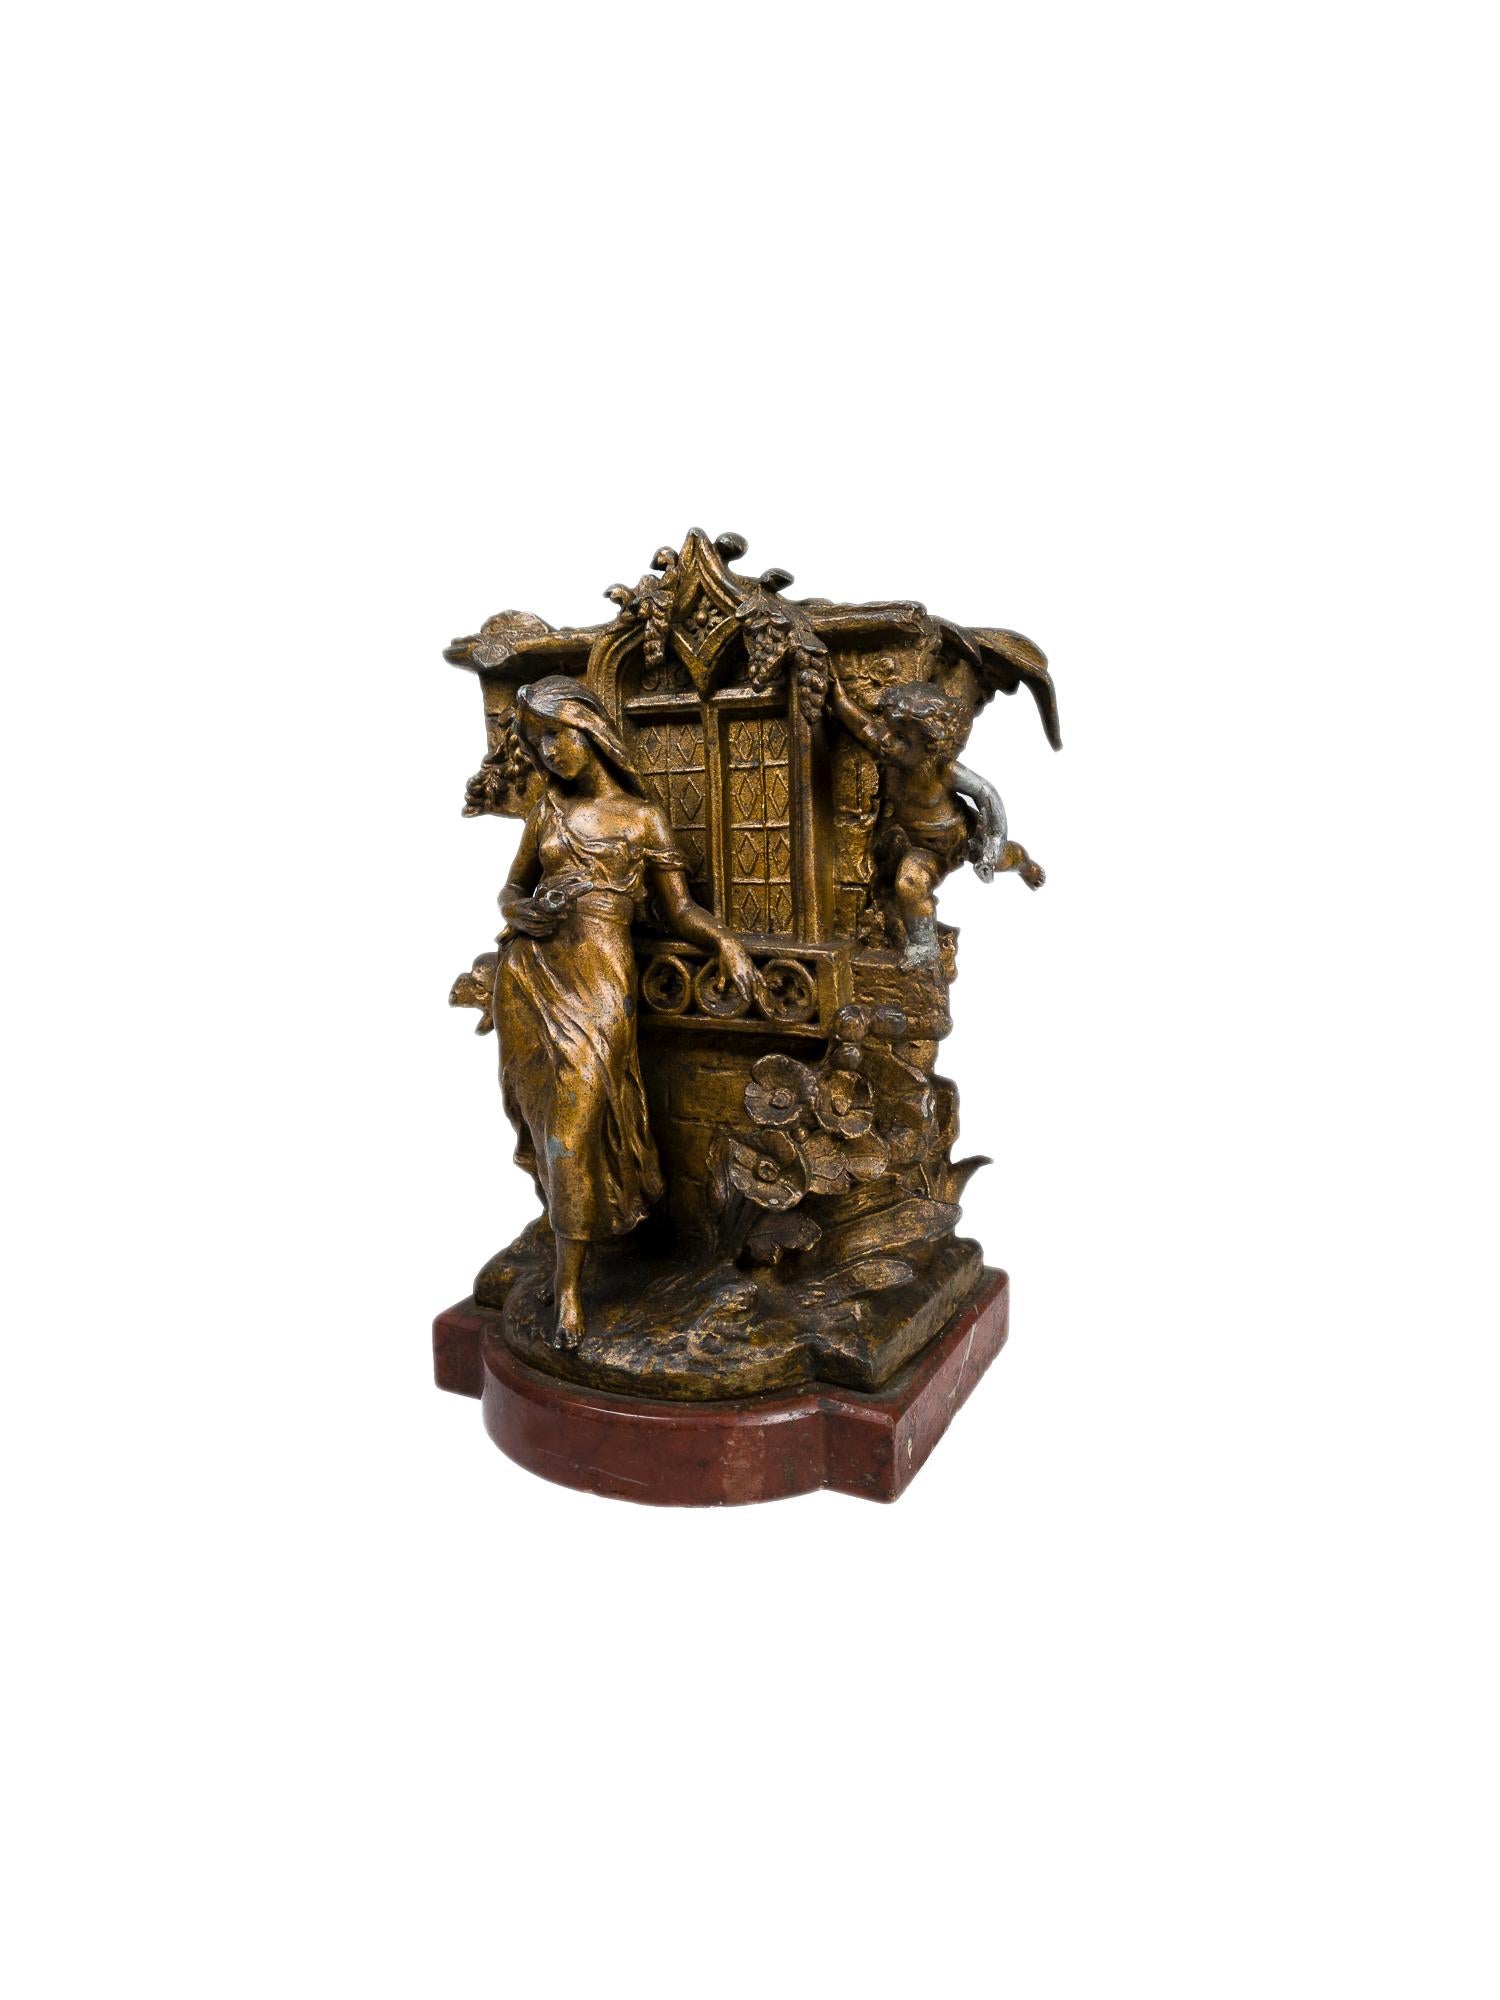 A 19th-century Baroque Revivalist bronze jardiniere featuring a window in the Baroque style, gargoyles, a woman, and cherubim amidst the flora engulfing the building 